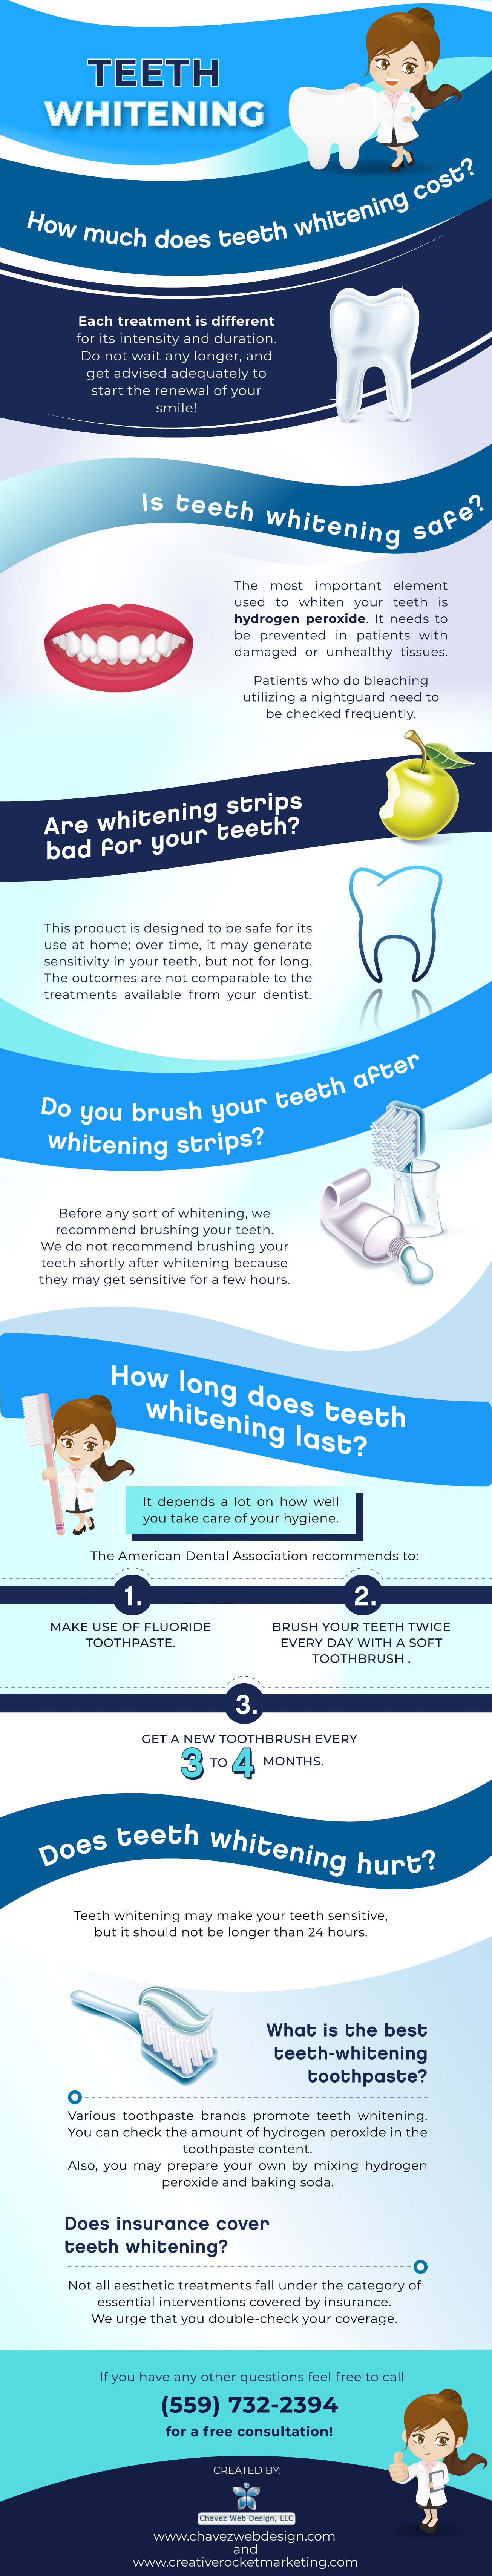 theeth-whitening-infographic